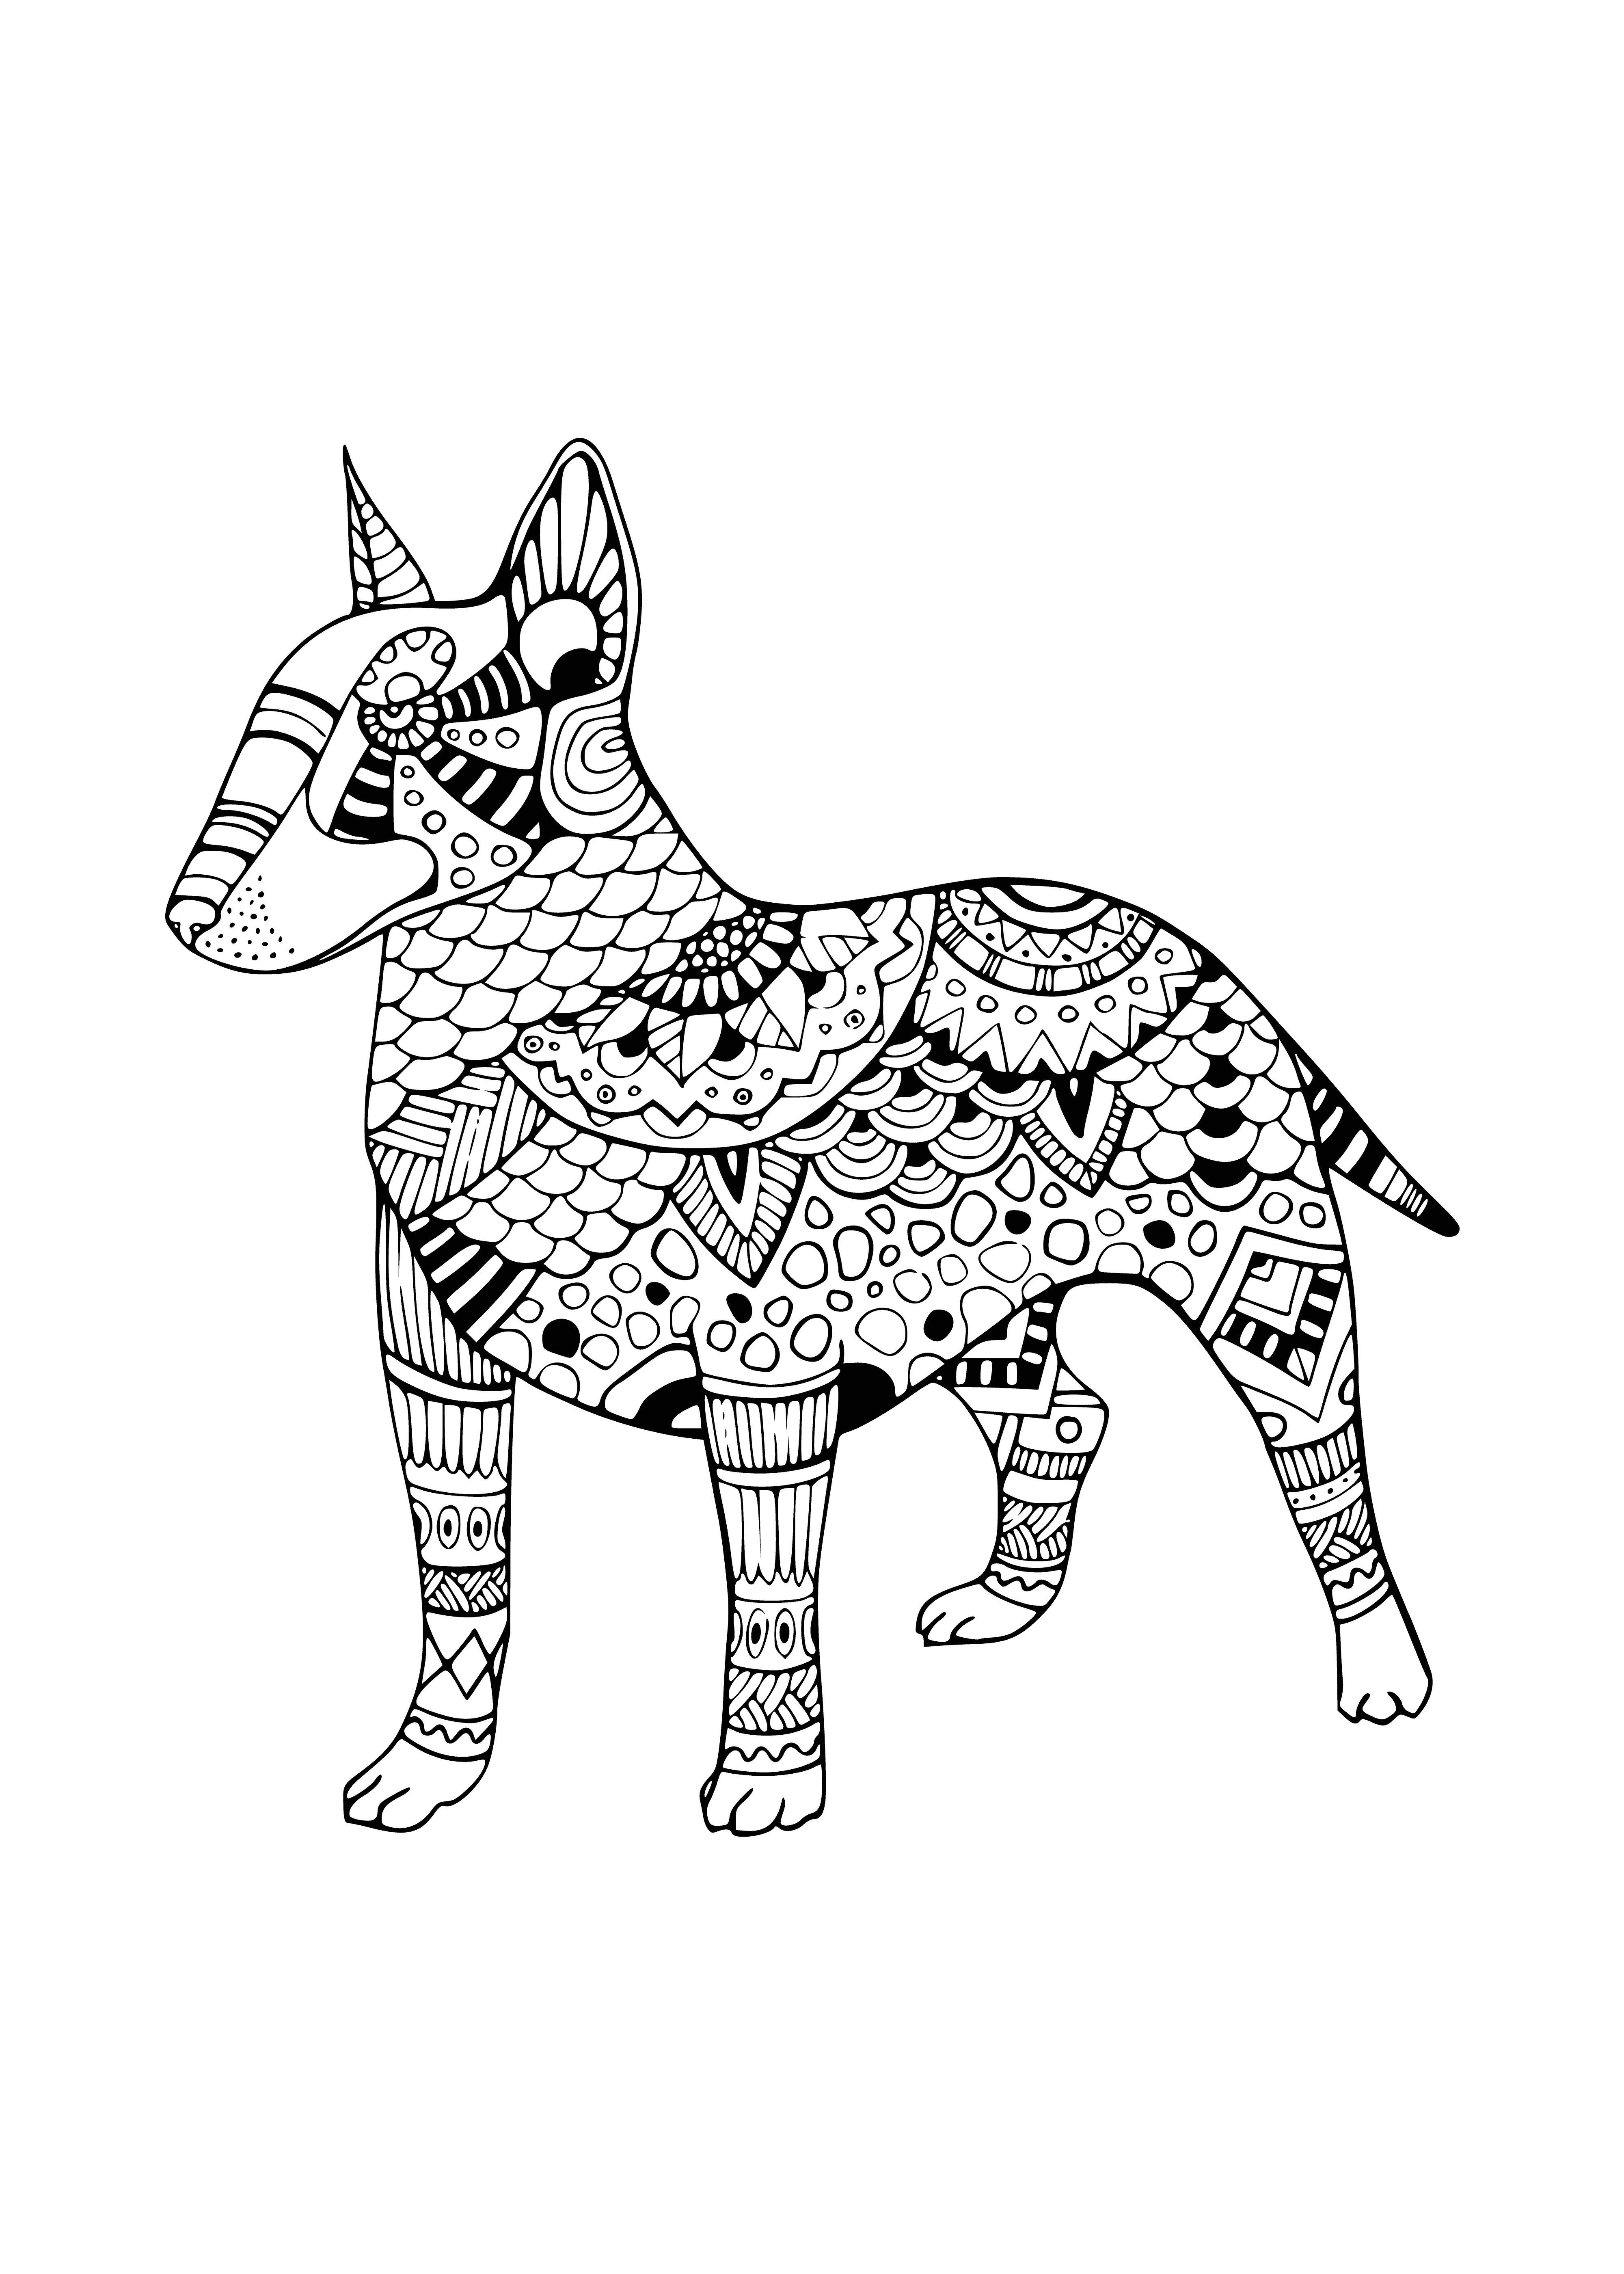 Bull terrier coloring page